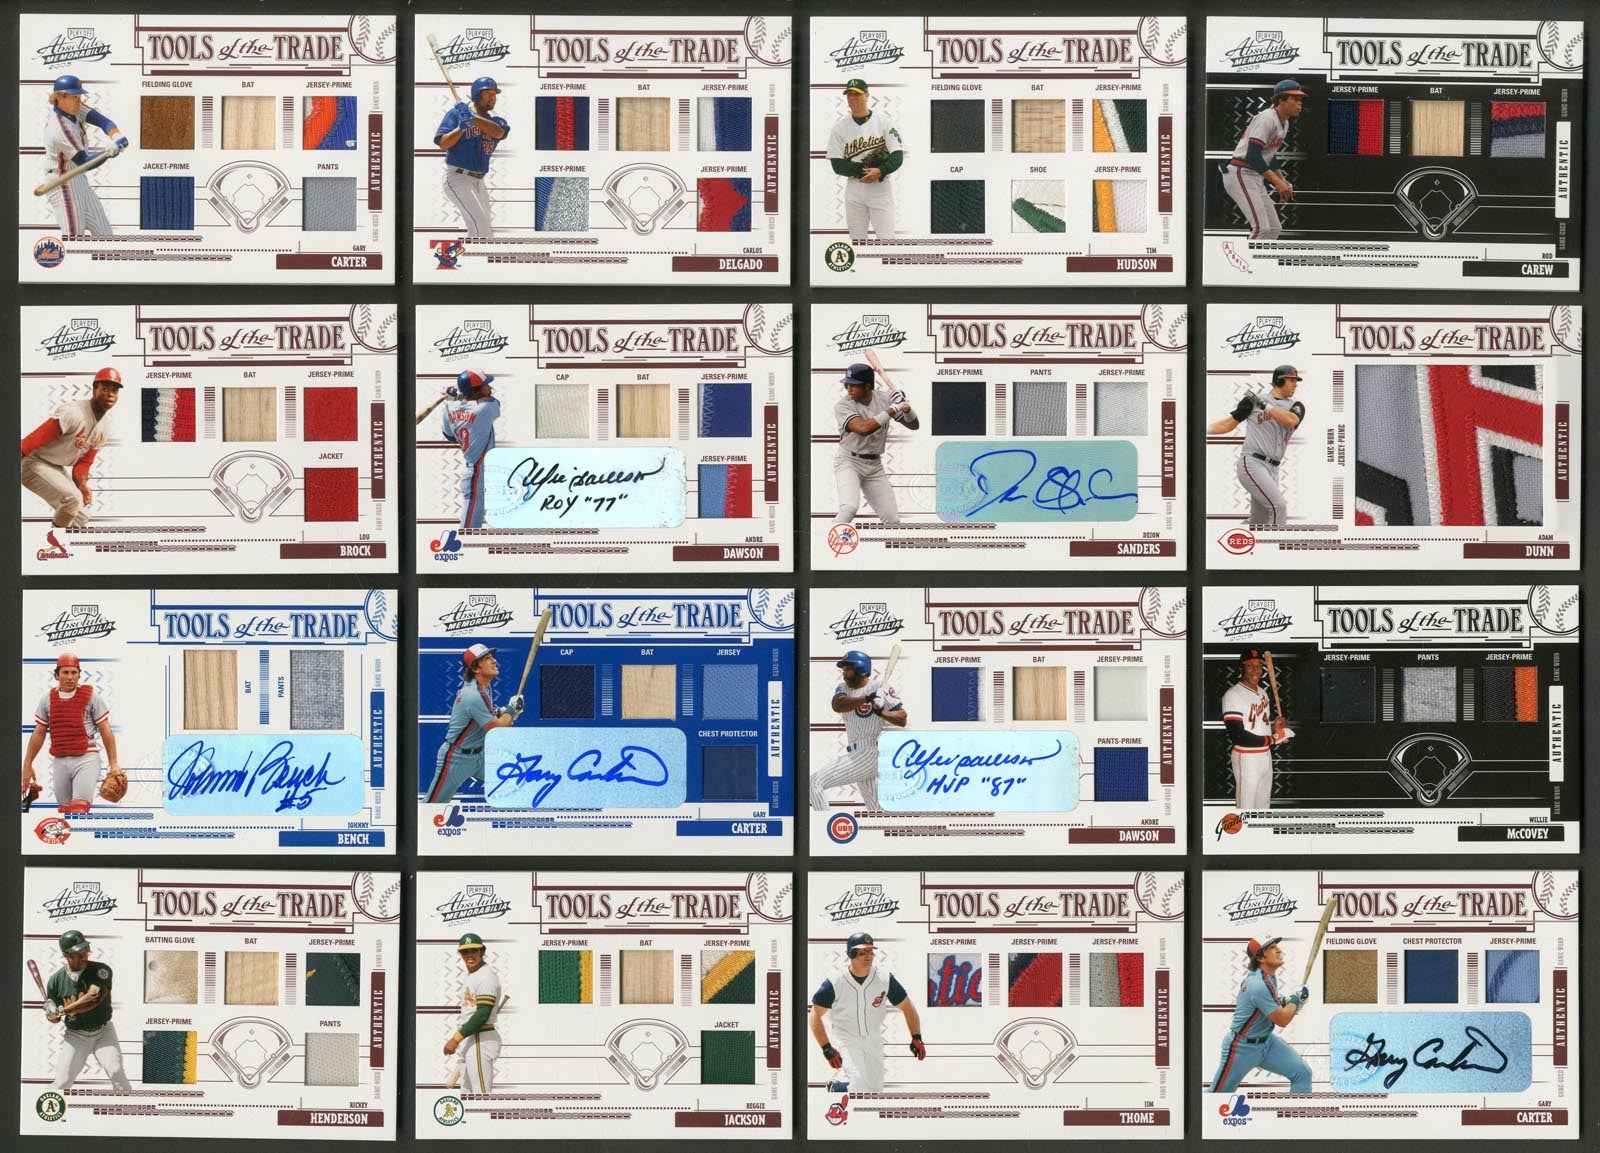 - Incredible 2005 Absolute Memorabilia Tools of the Trade Autograph & Multi-Patch Collection (137 Cards, 570 Swatches, 37 Autos)